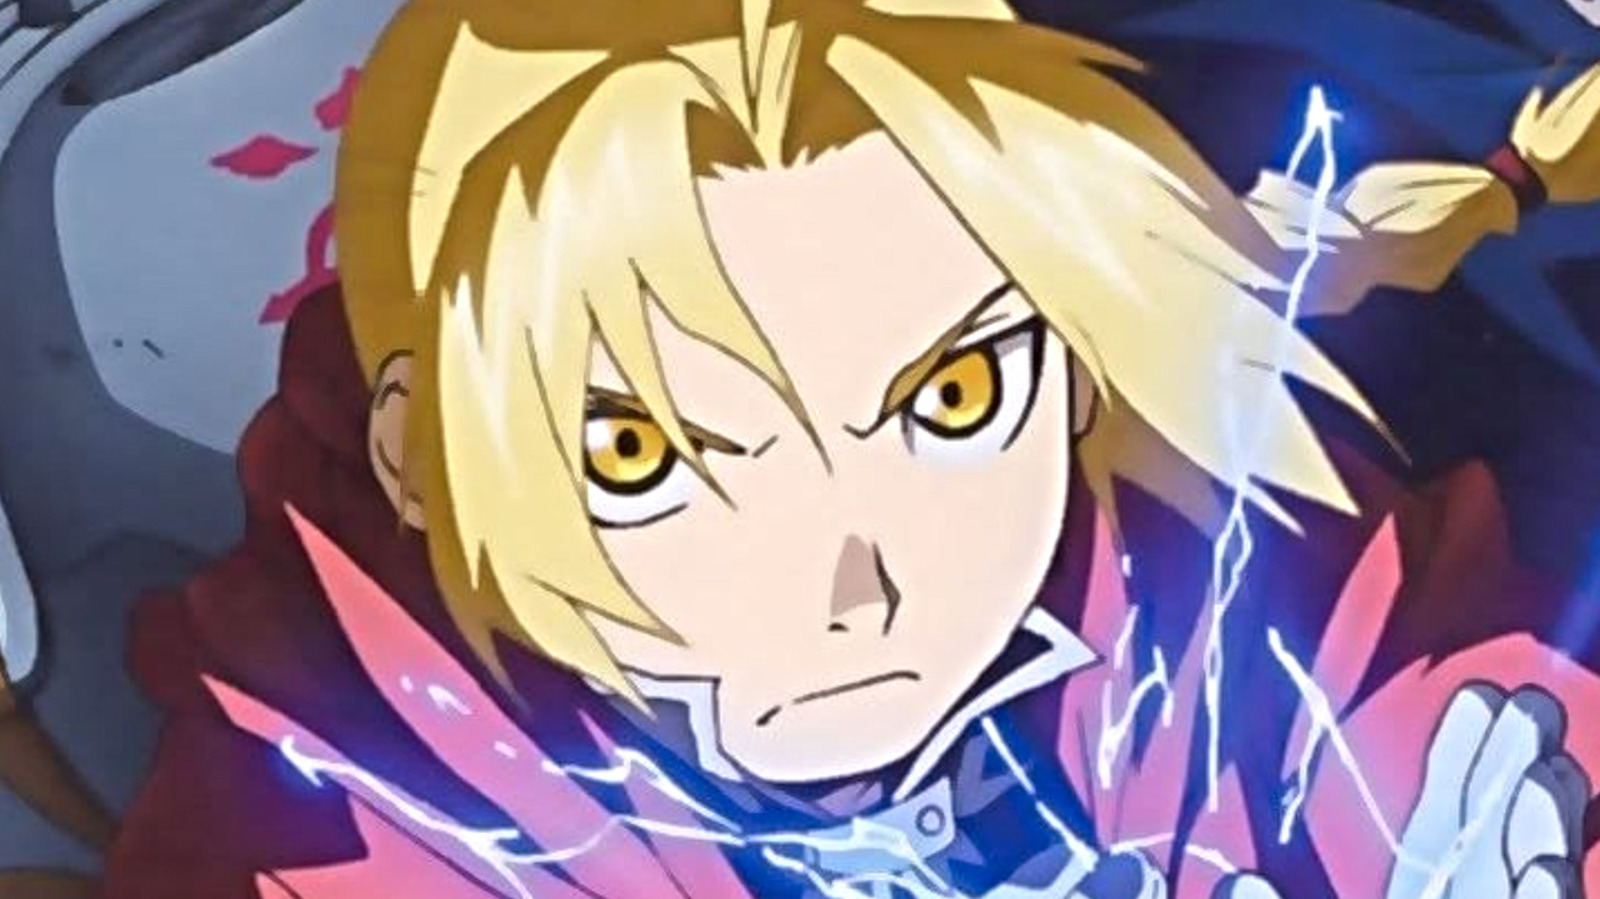 Late Fullmetal Alchemist Star to Voice New Project Thanks to AI